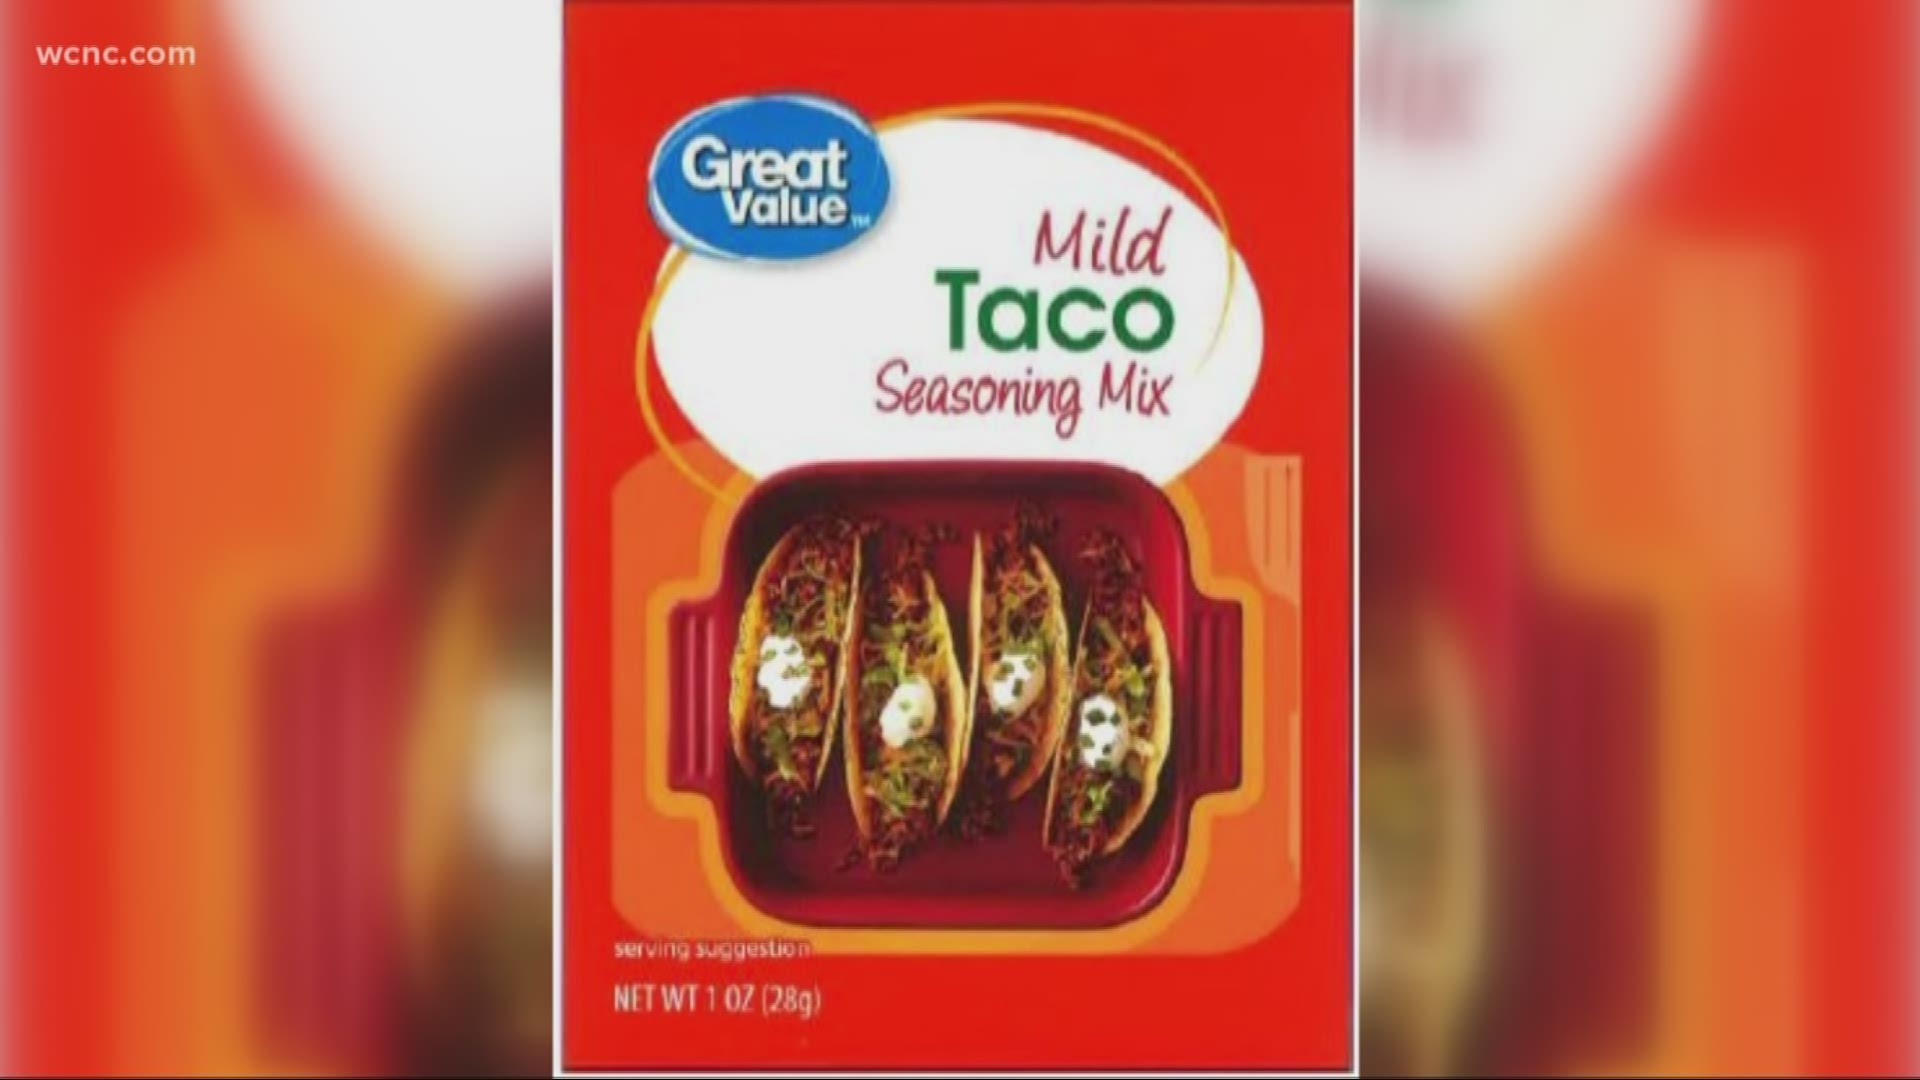 The FDA has issued a recall for Great Value brand taco seasoning sold at Walmart stores in the Carolinas over Salmonella concerns. If you purchased this product, you should throw it away or return it.